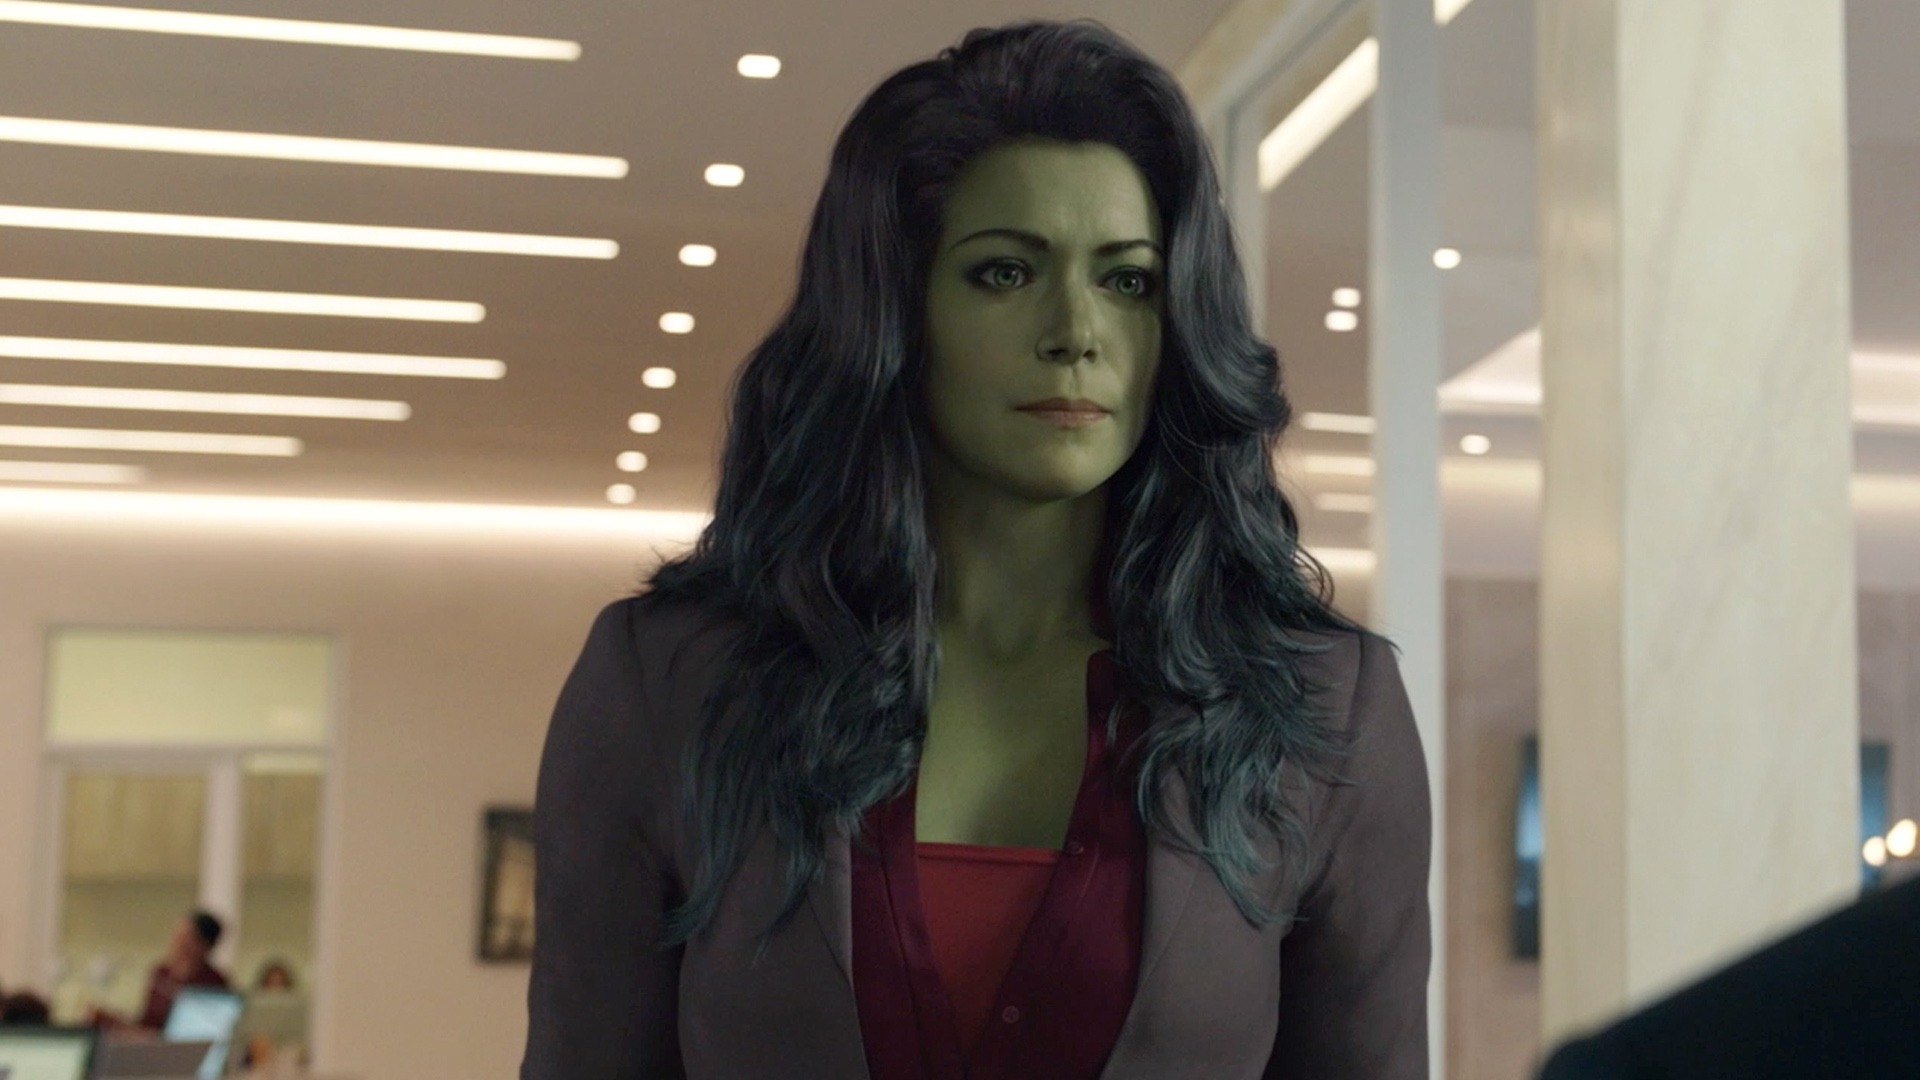 Rotten Tomatoes - The first reviews are in for She-Hulk